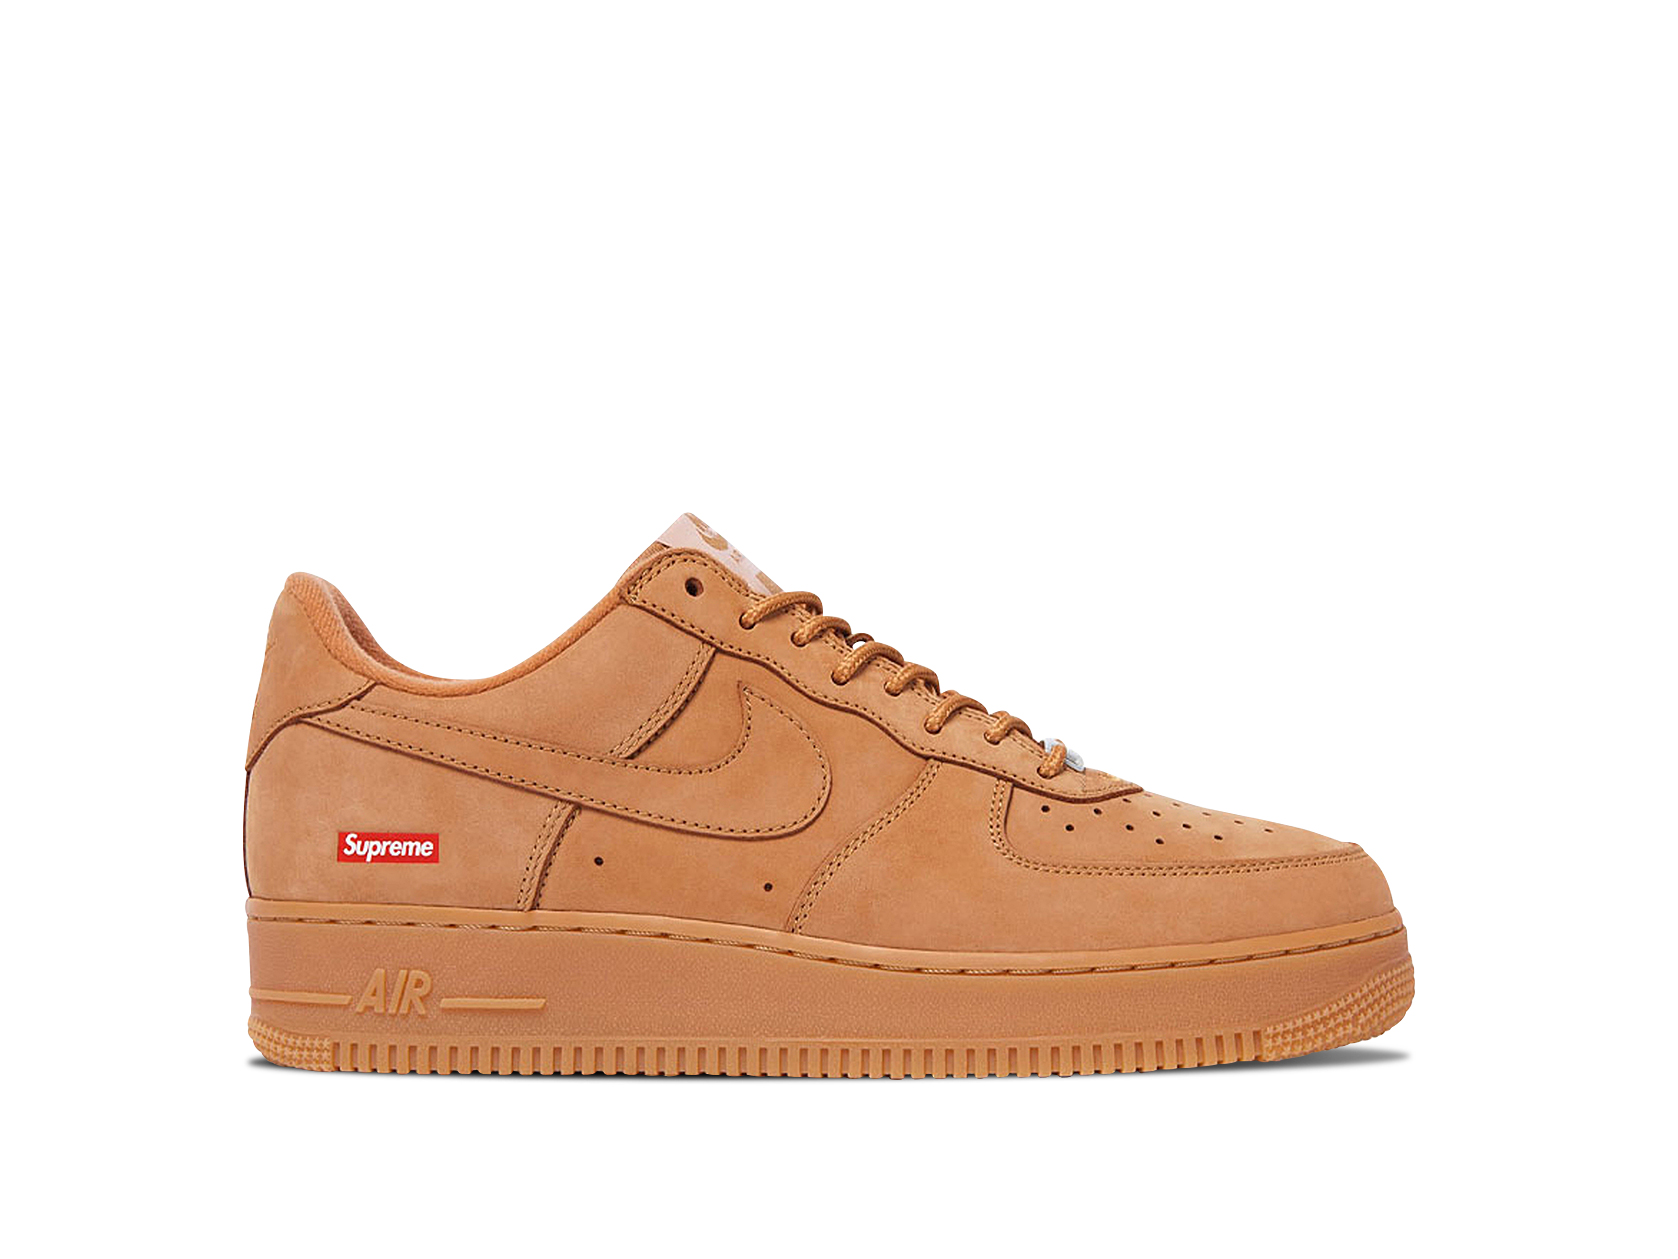 nike air force 1 '07 mid trainers in light bone with gum sole